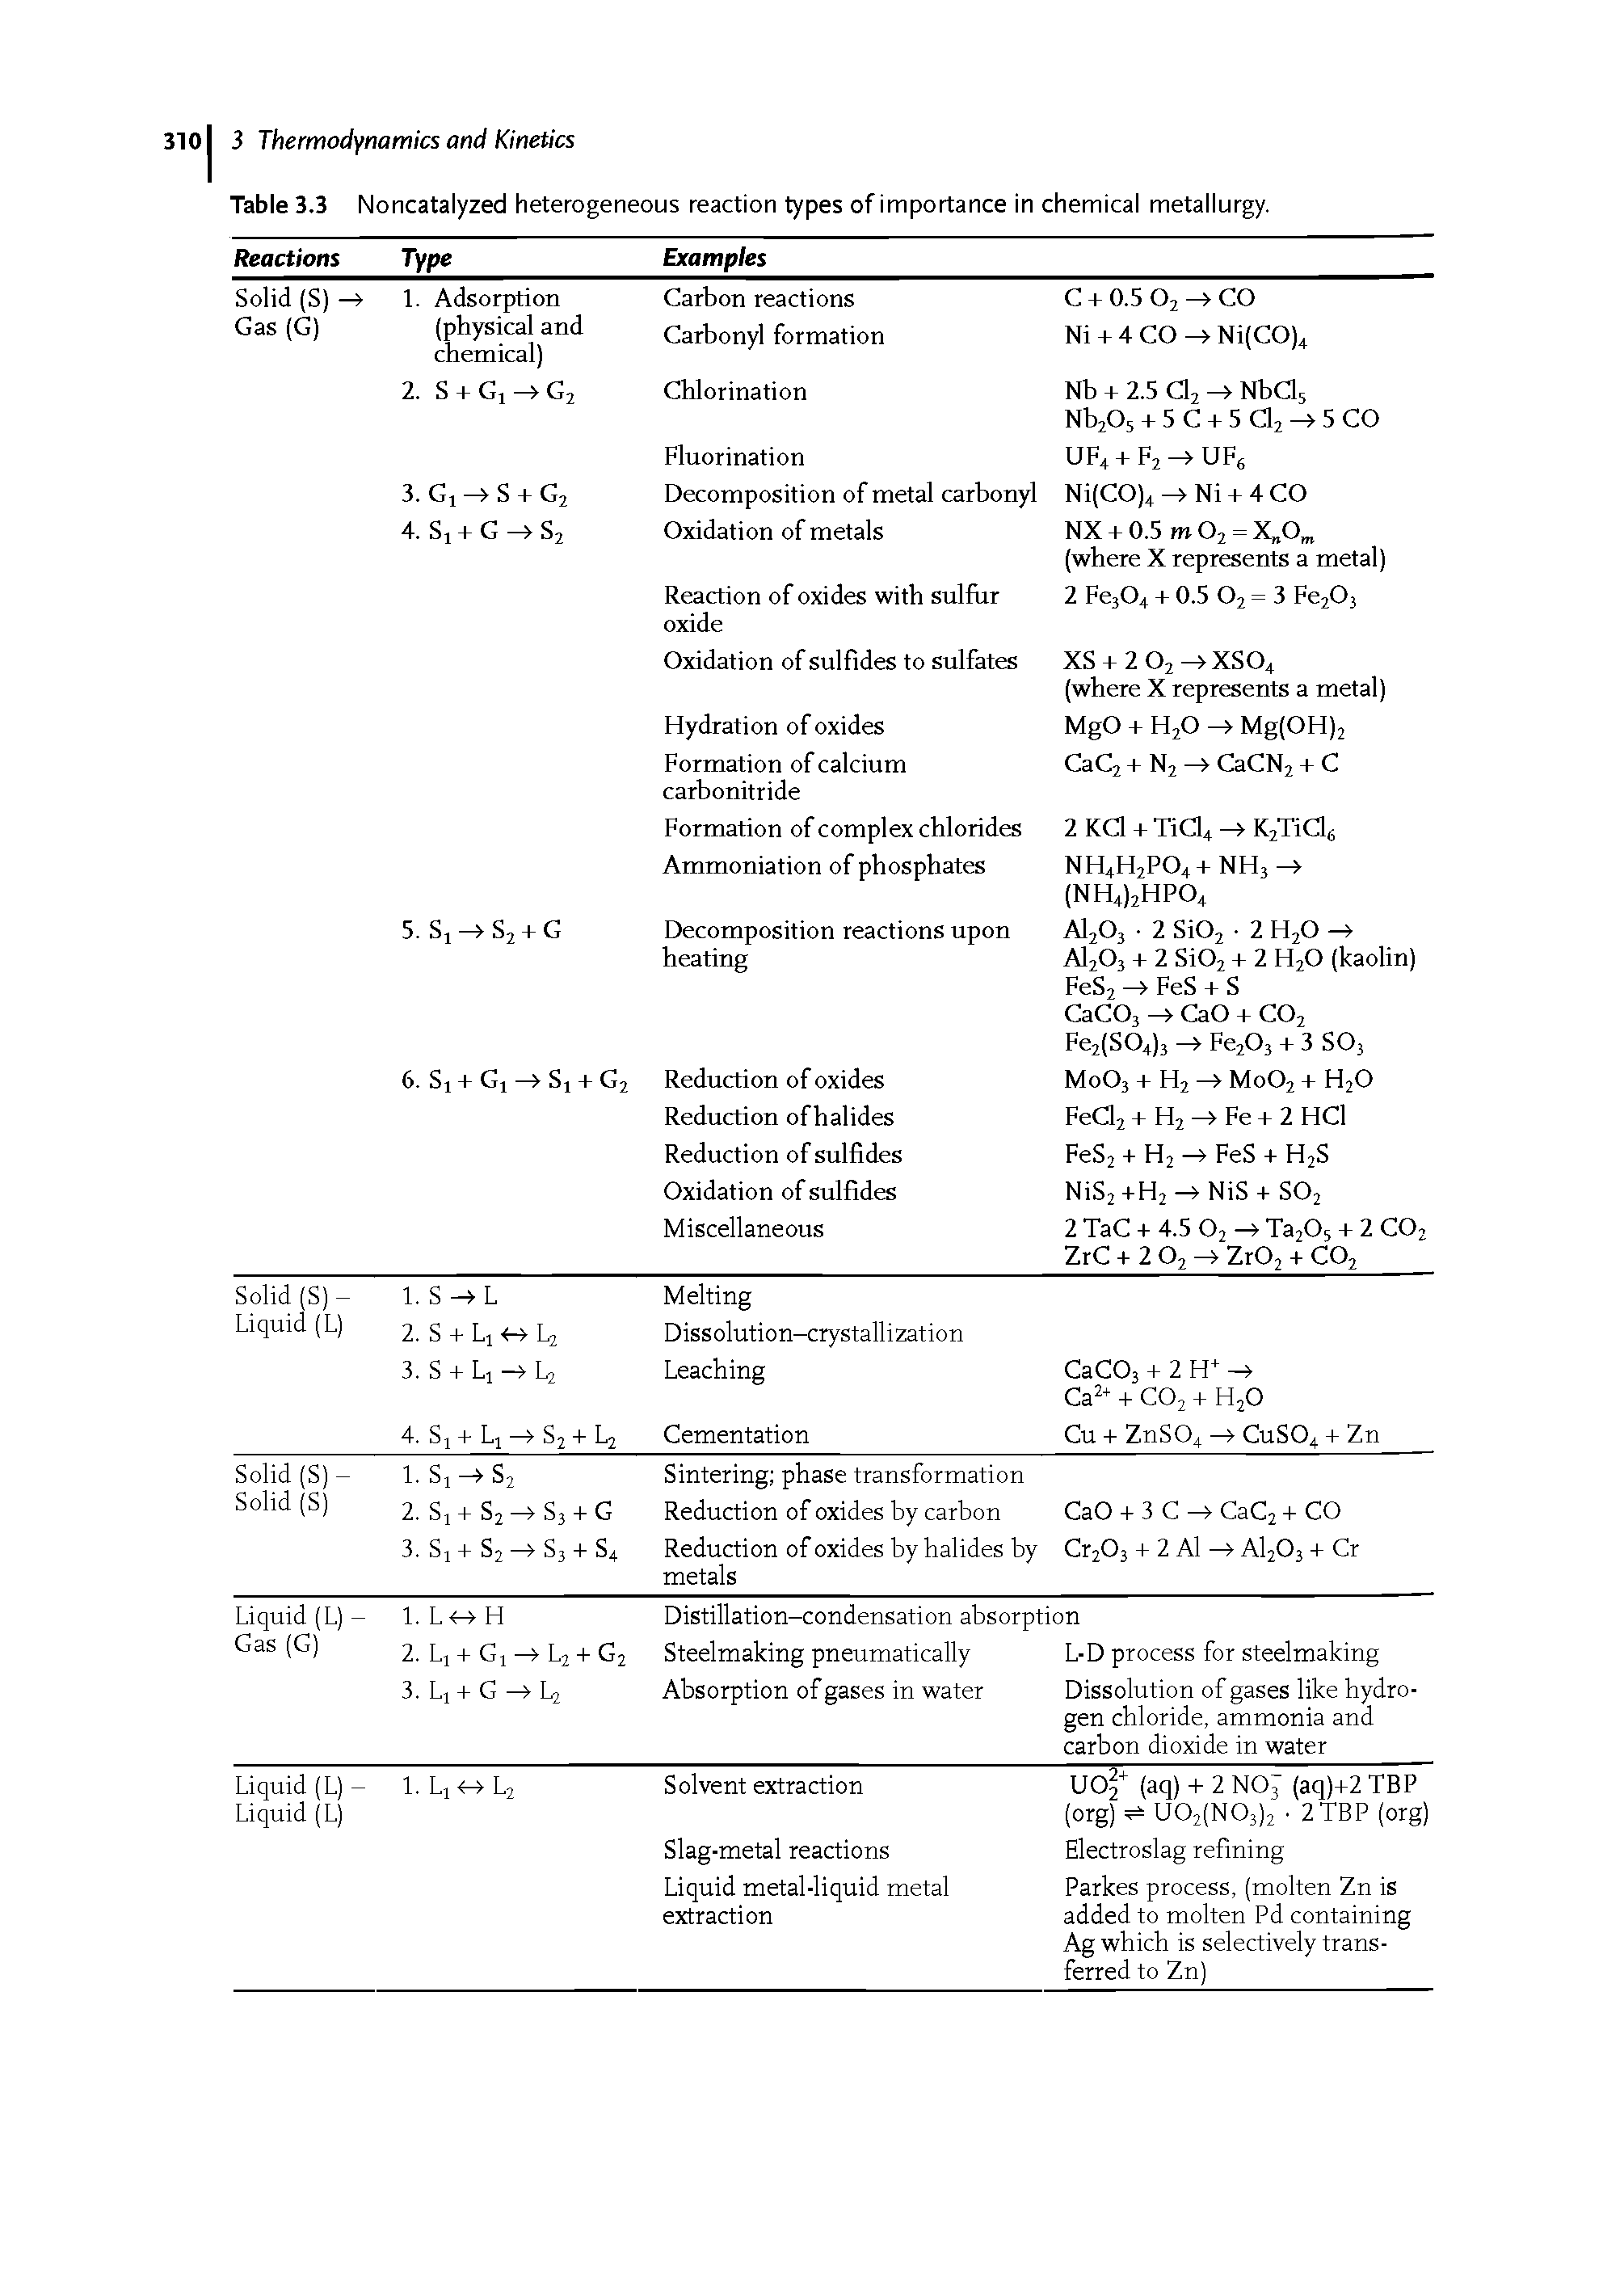 Table 3.3 Noncatalyzed heterogeneous reaction types of importance in chemical metallurgy.